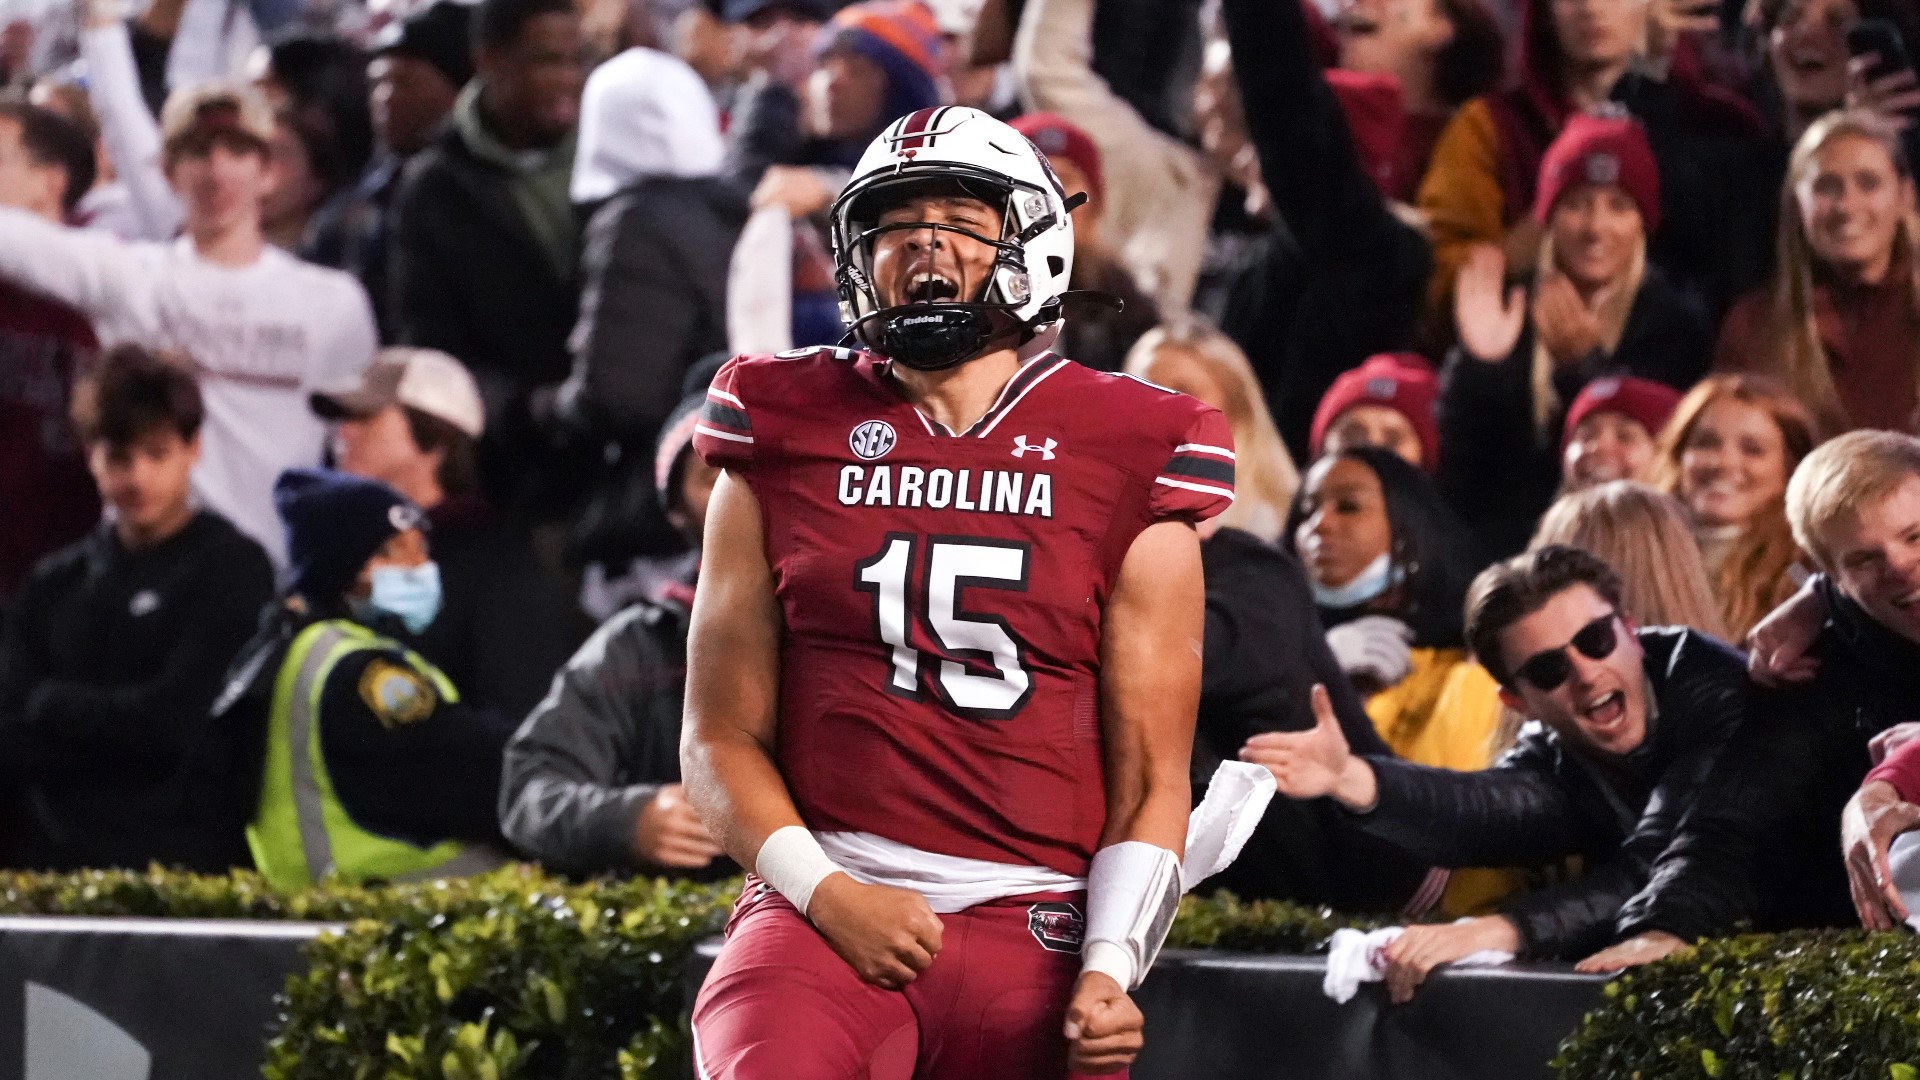 The South Carolina Gamecocks had their best game of the season Saturday night. And that led to their largest win (by points) ever against the Florida Gators.